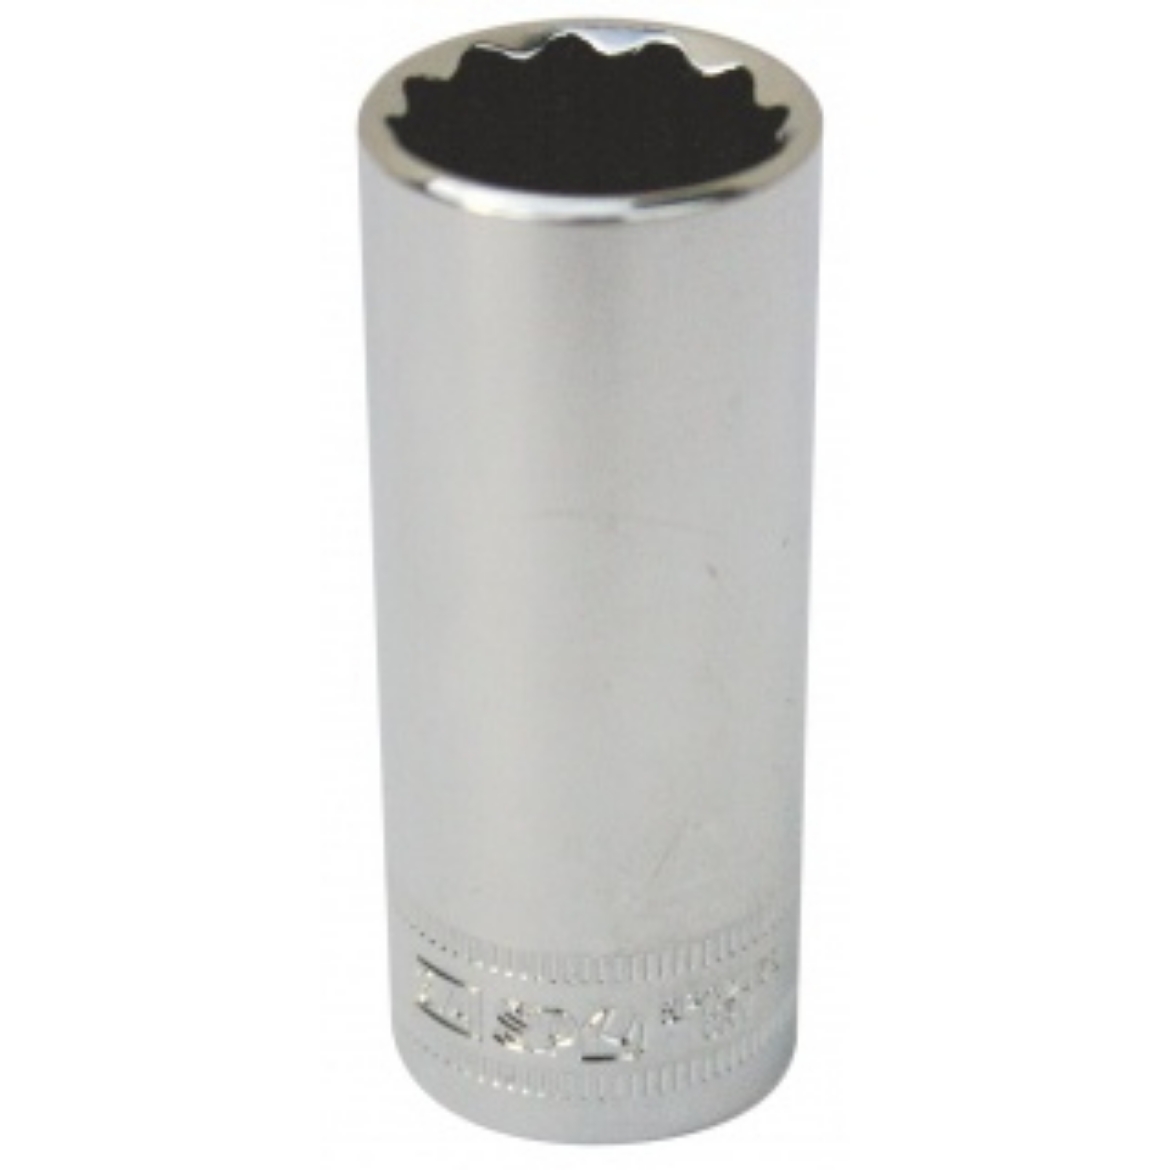 Picture of SOCKET DEEP 3/8"DR 12PT METRIC 16MM SP TOOLS